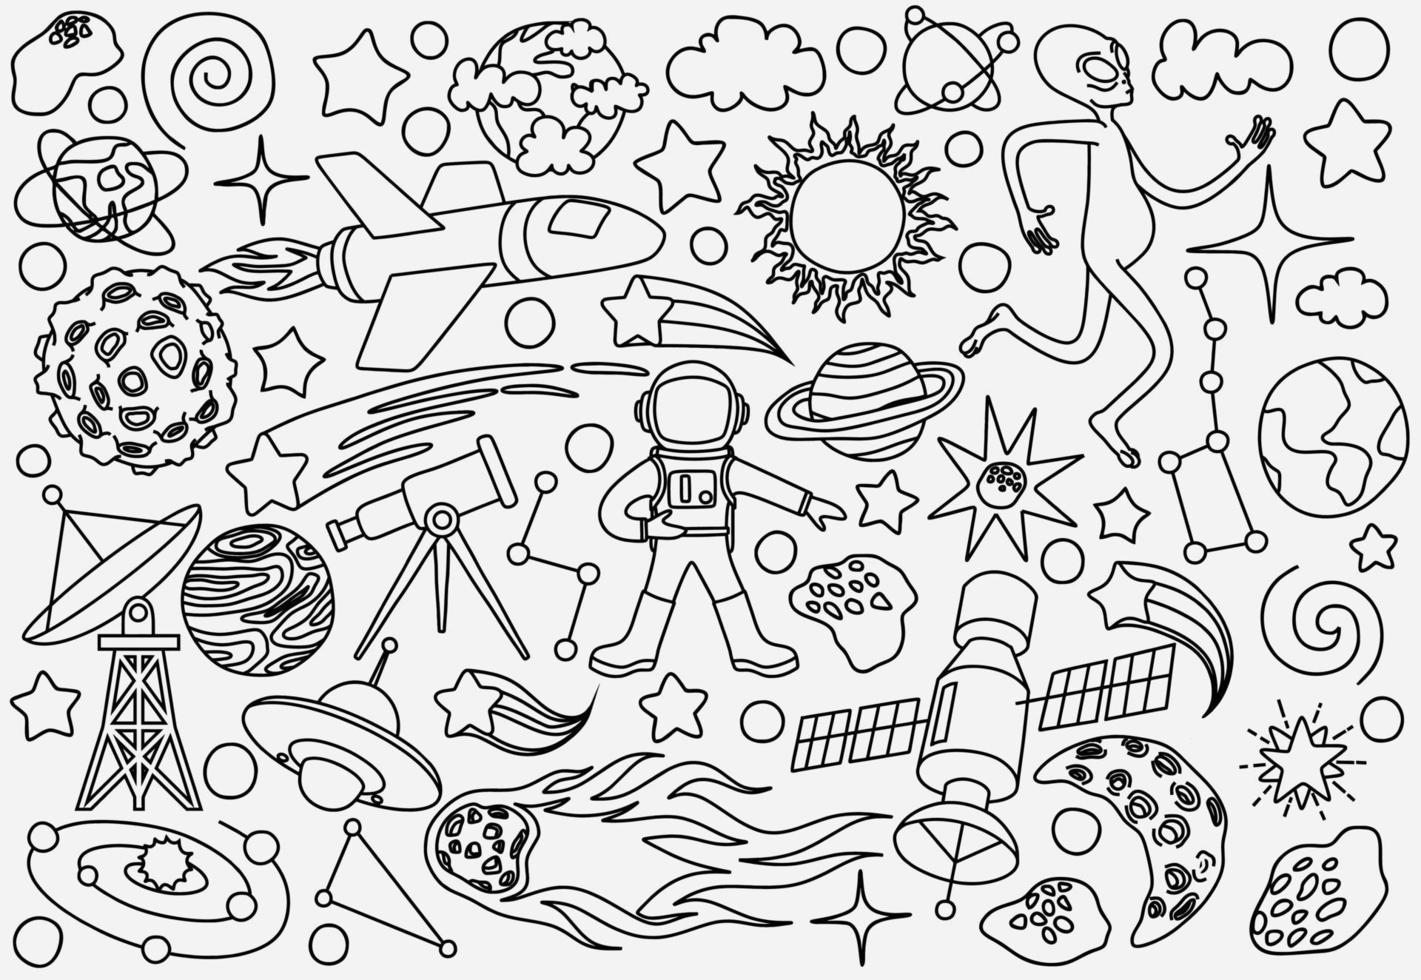 hand drawn doodles cartoon set of Space objects vector